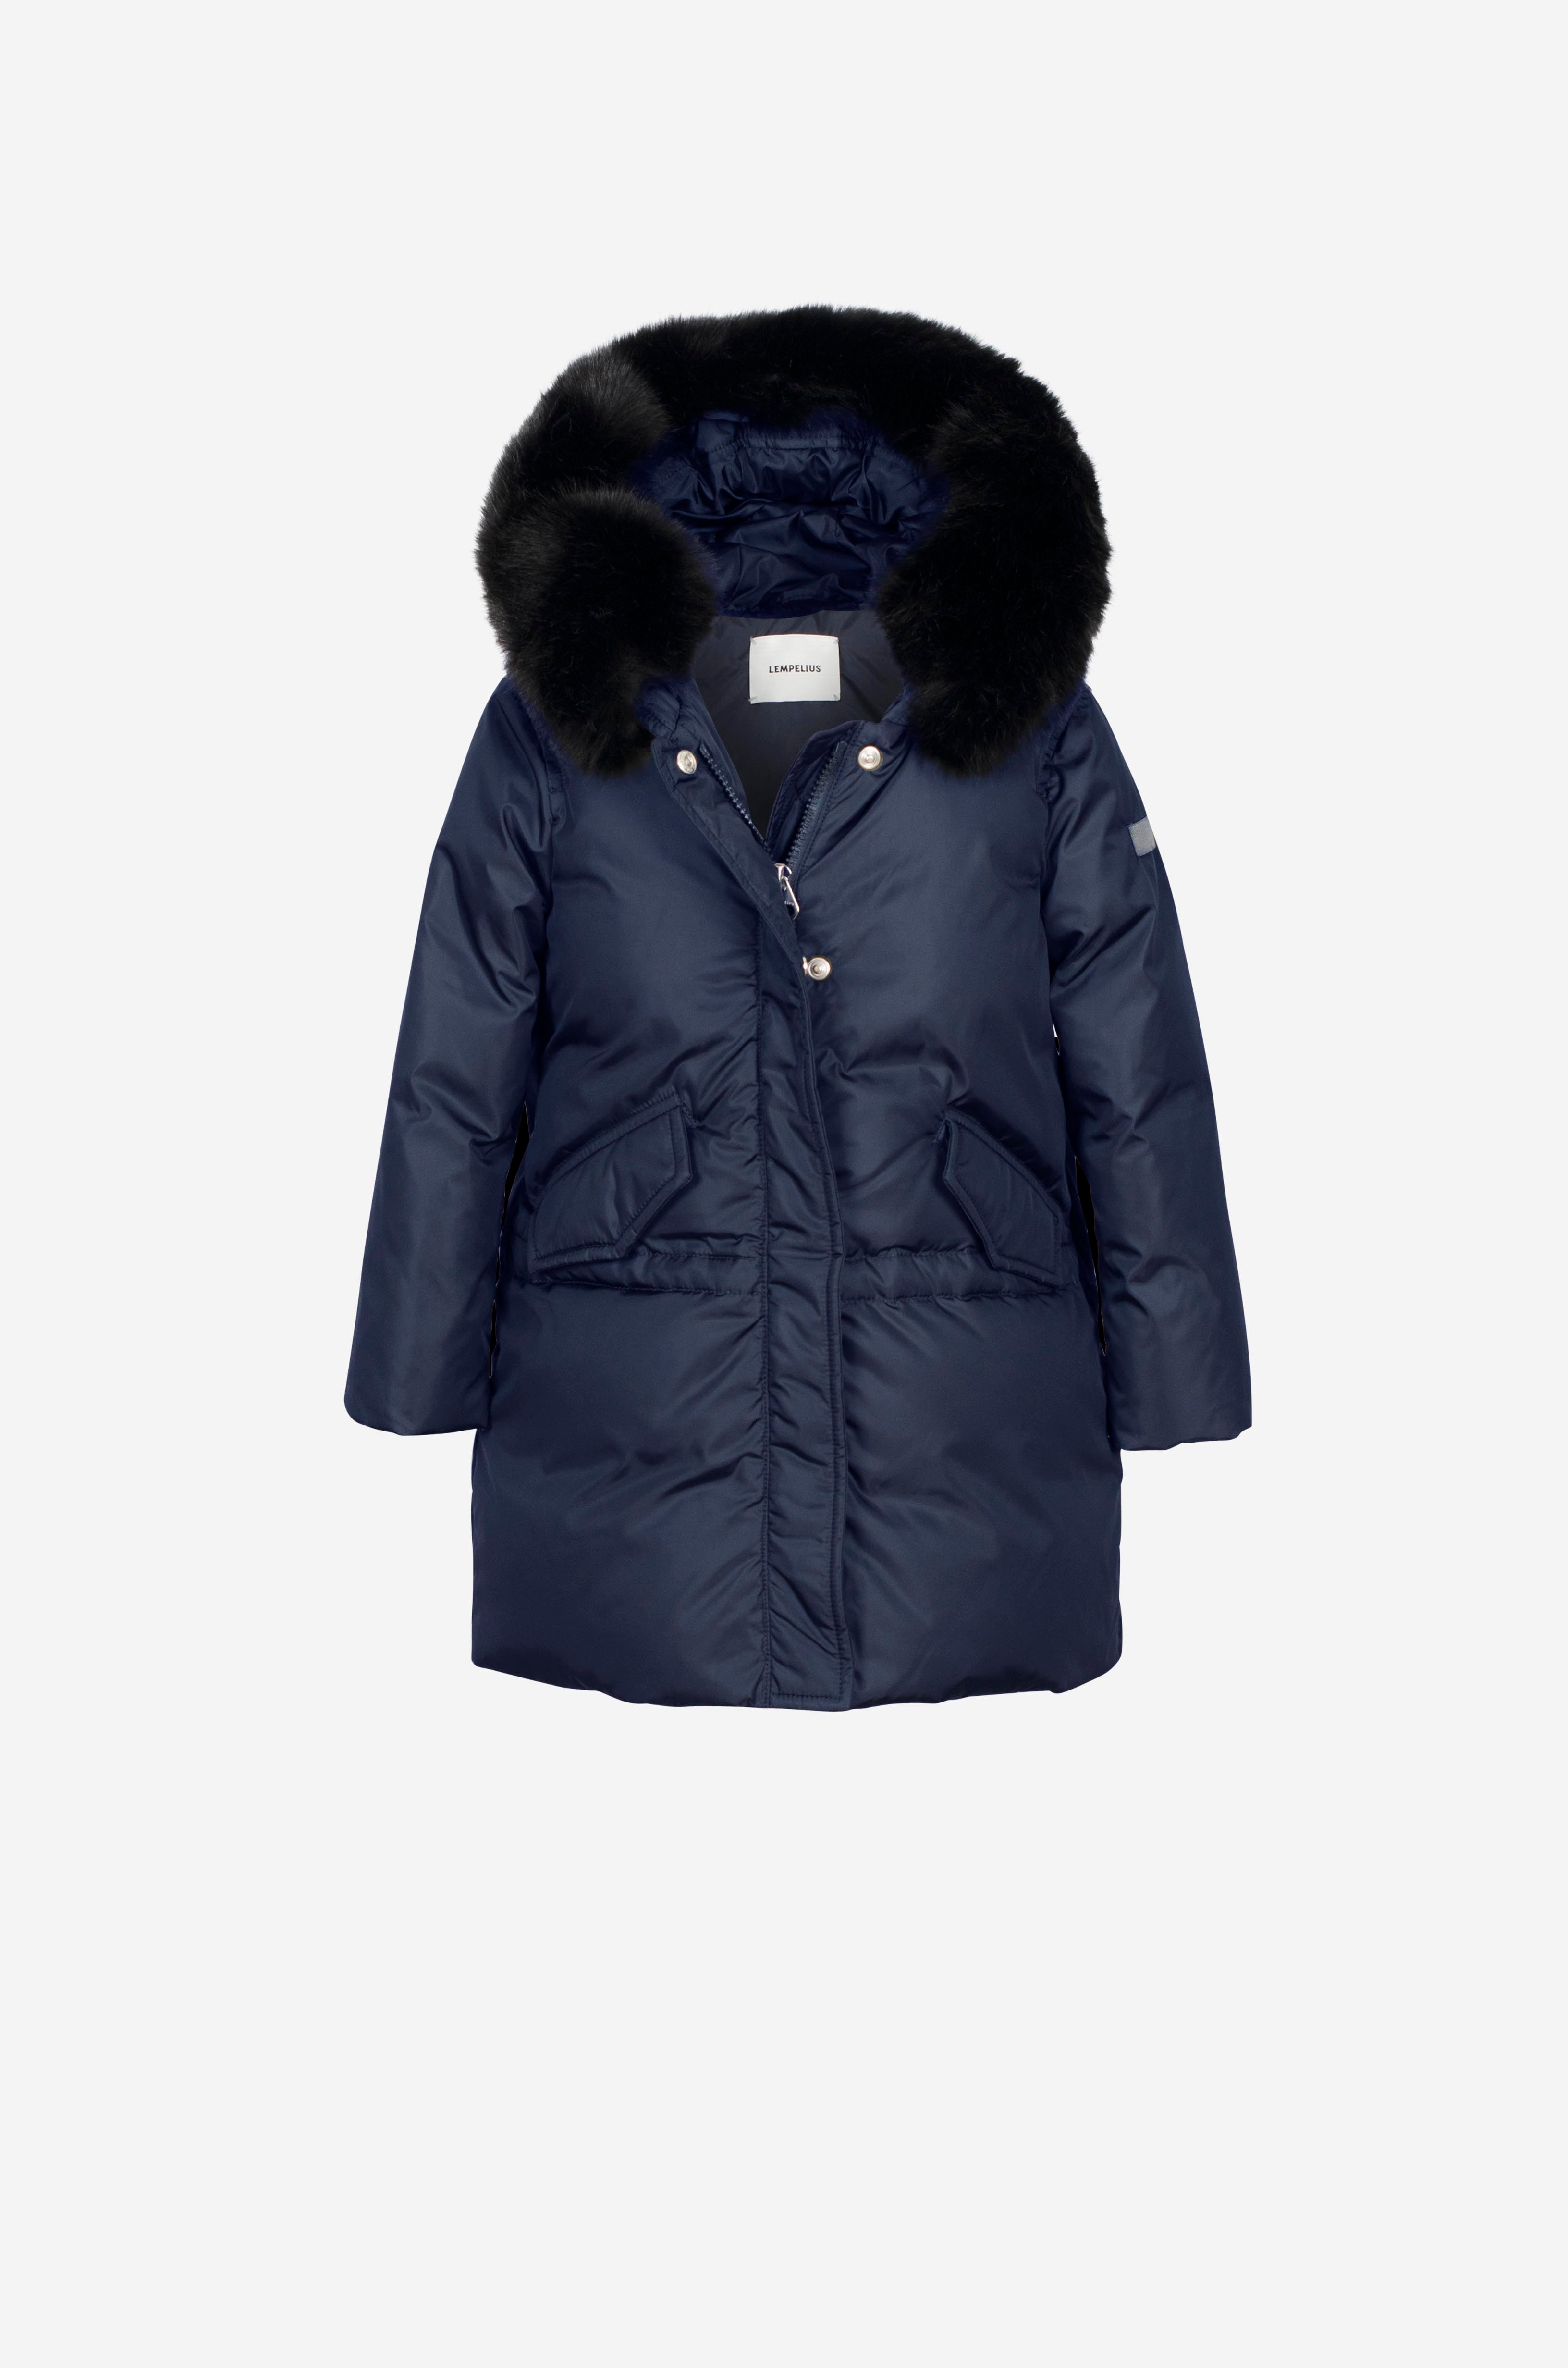 Girls Down Parka with faux fur